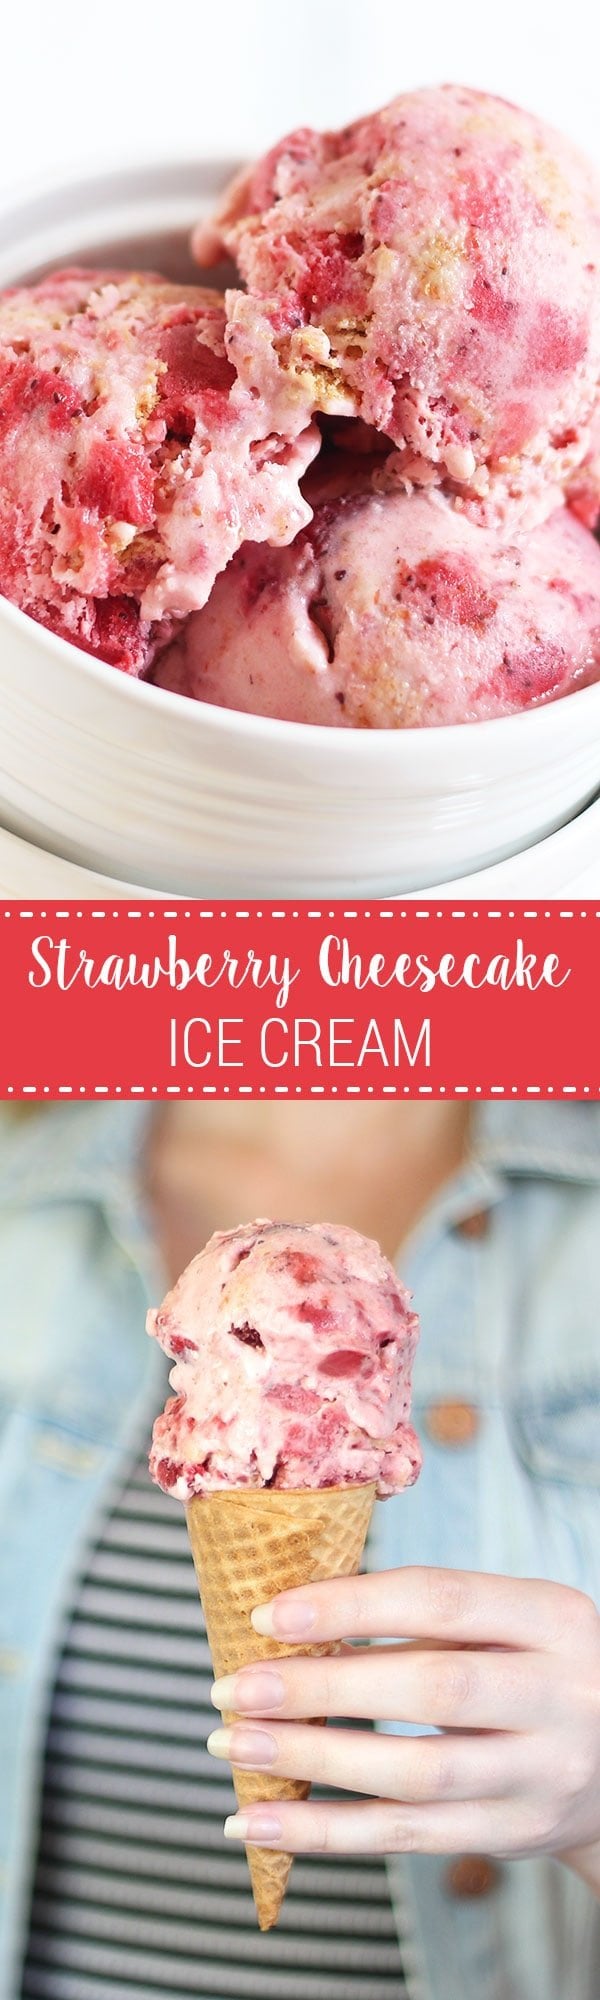 The PERFECT summer treat! This literally tastes like you took the best slice of strawberry cheesecake and turned it into ice cream!!